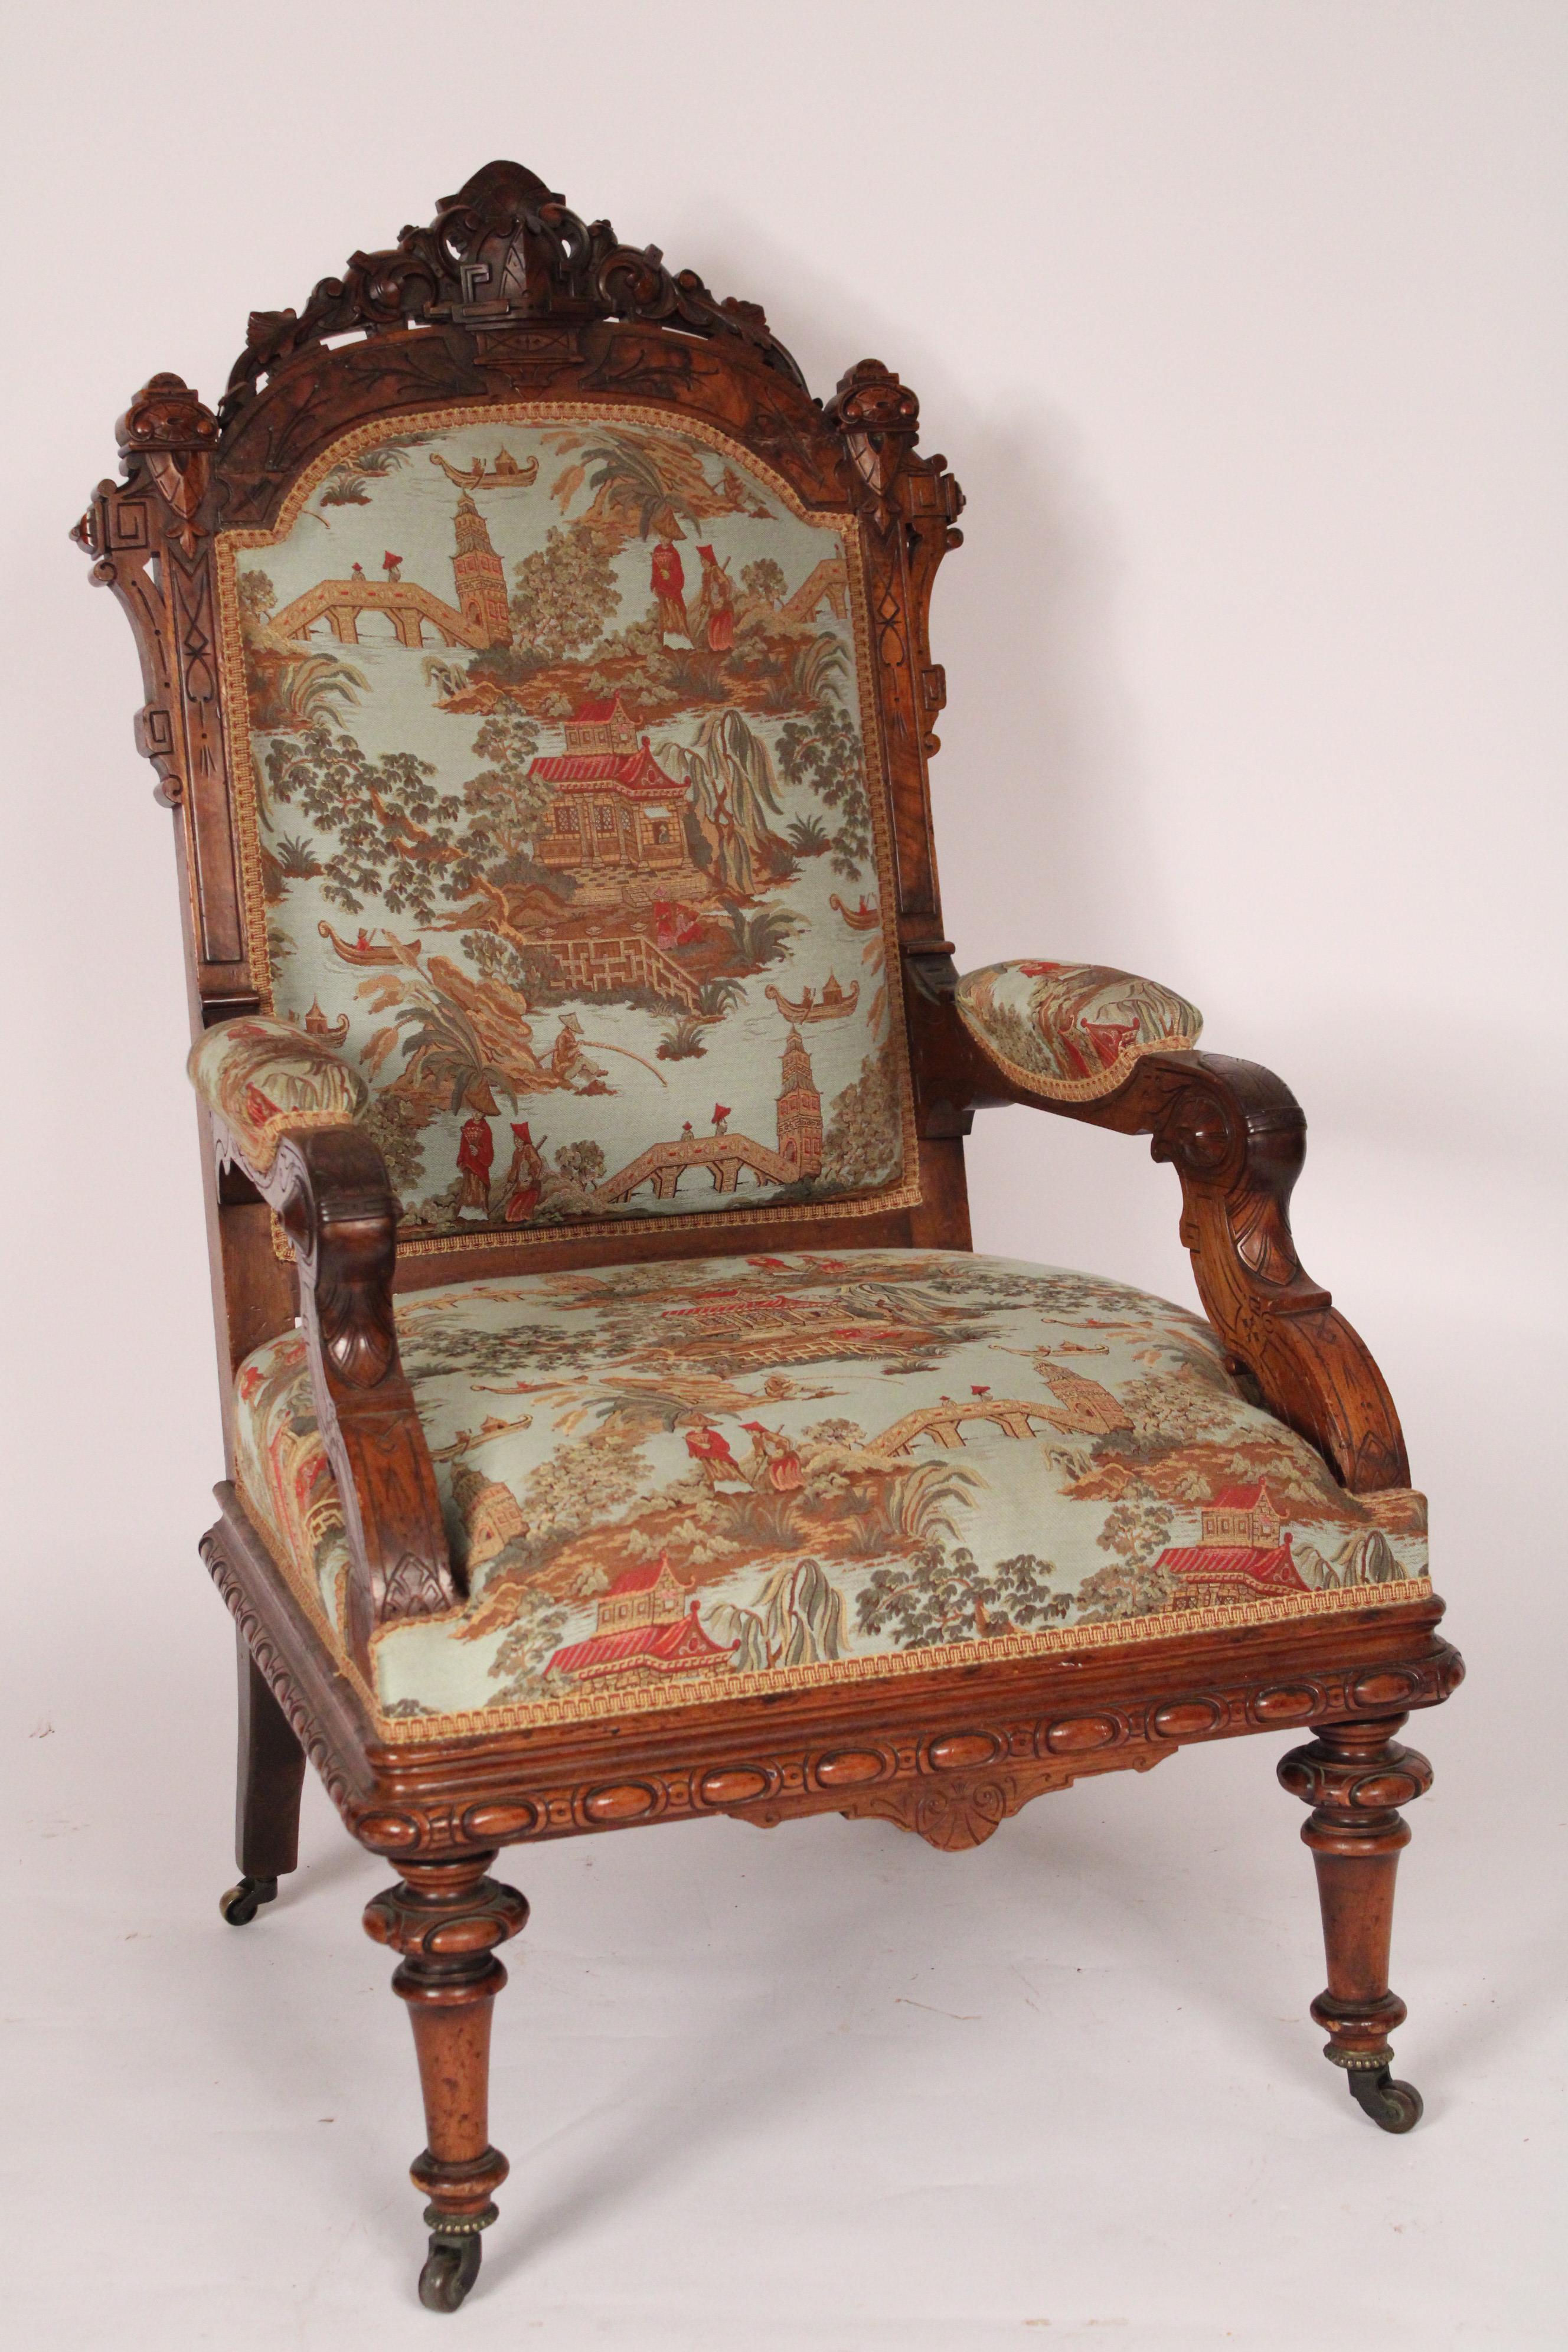 Antique Victorian carved walnut and burl walnut armchair, circa 1880. Recently re upholstered in a chinoiserie design fabric. The seat height is 18